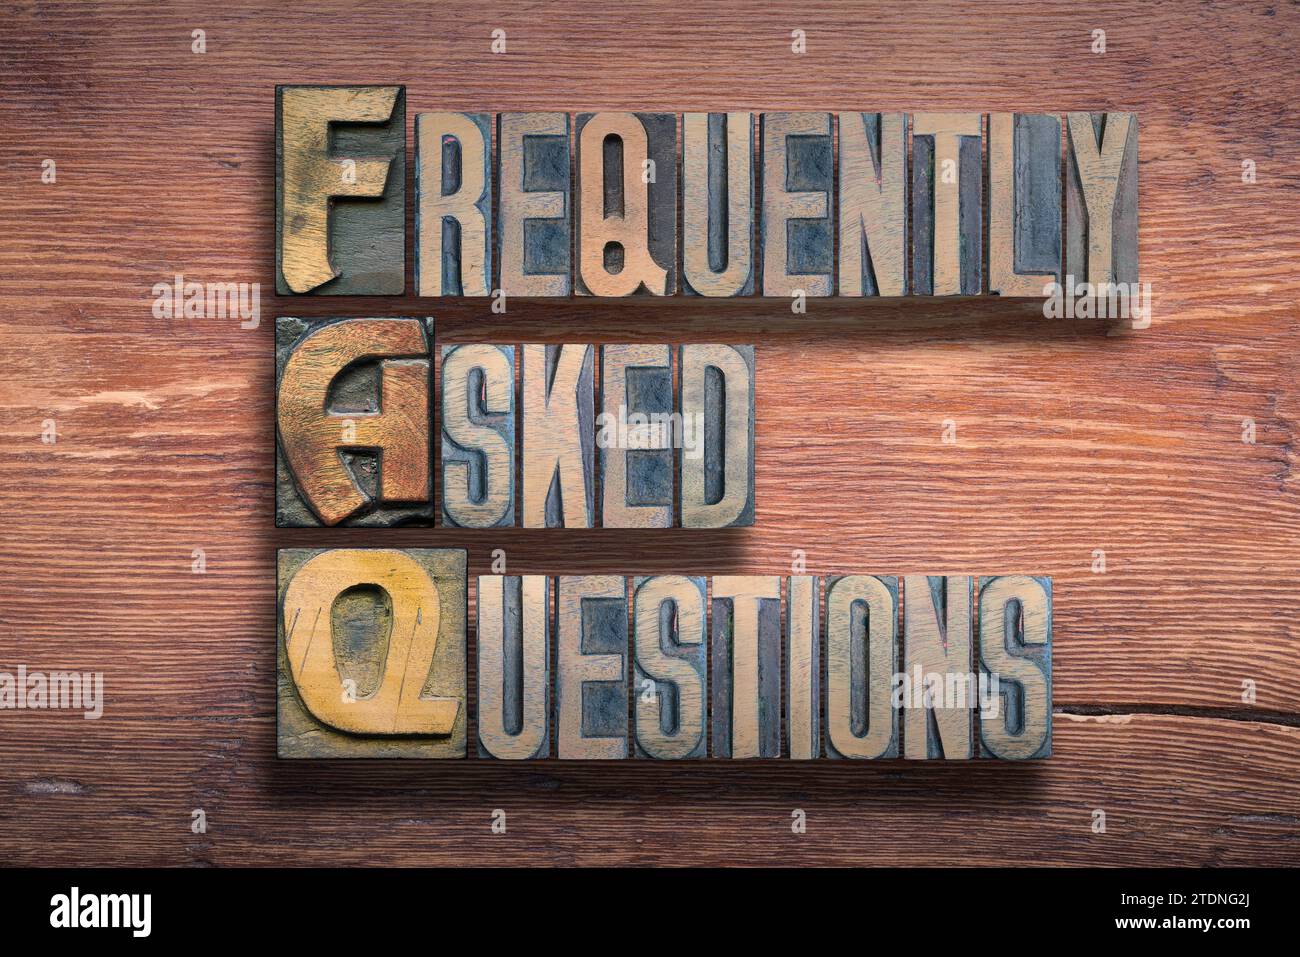 frequently asked questions abbreviation combined on vintage varnished wooden surface Stock Photo